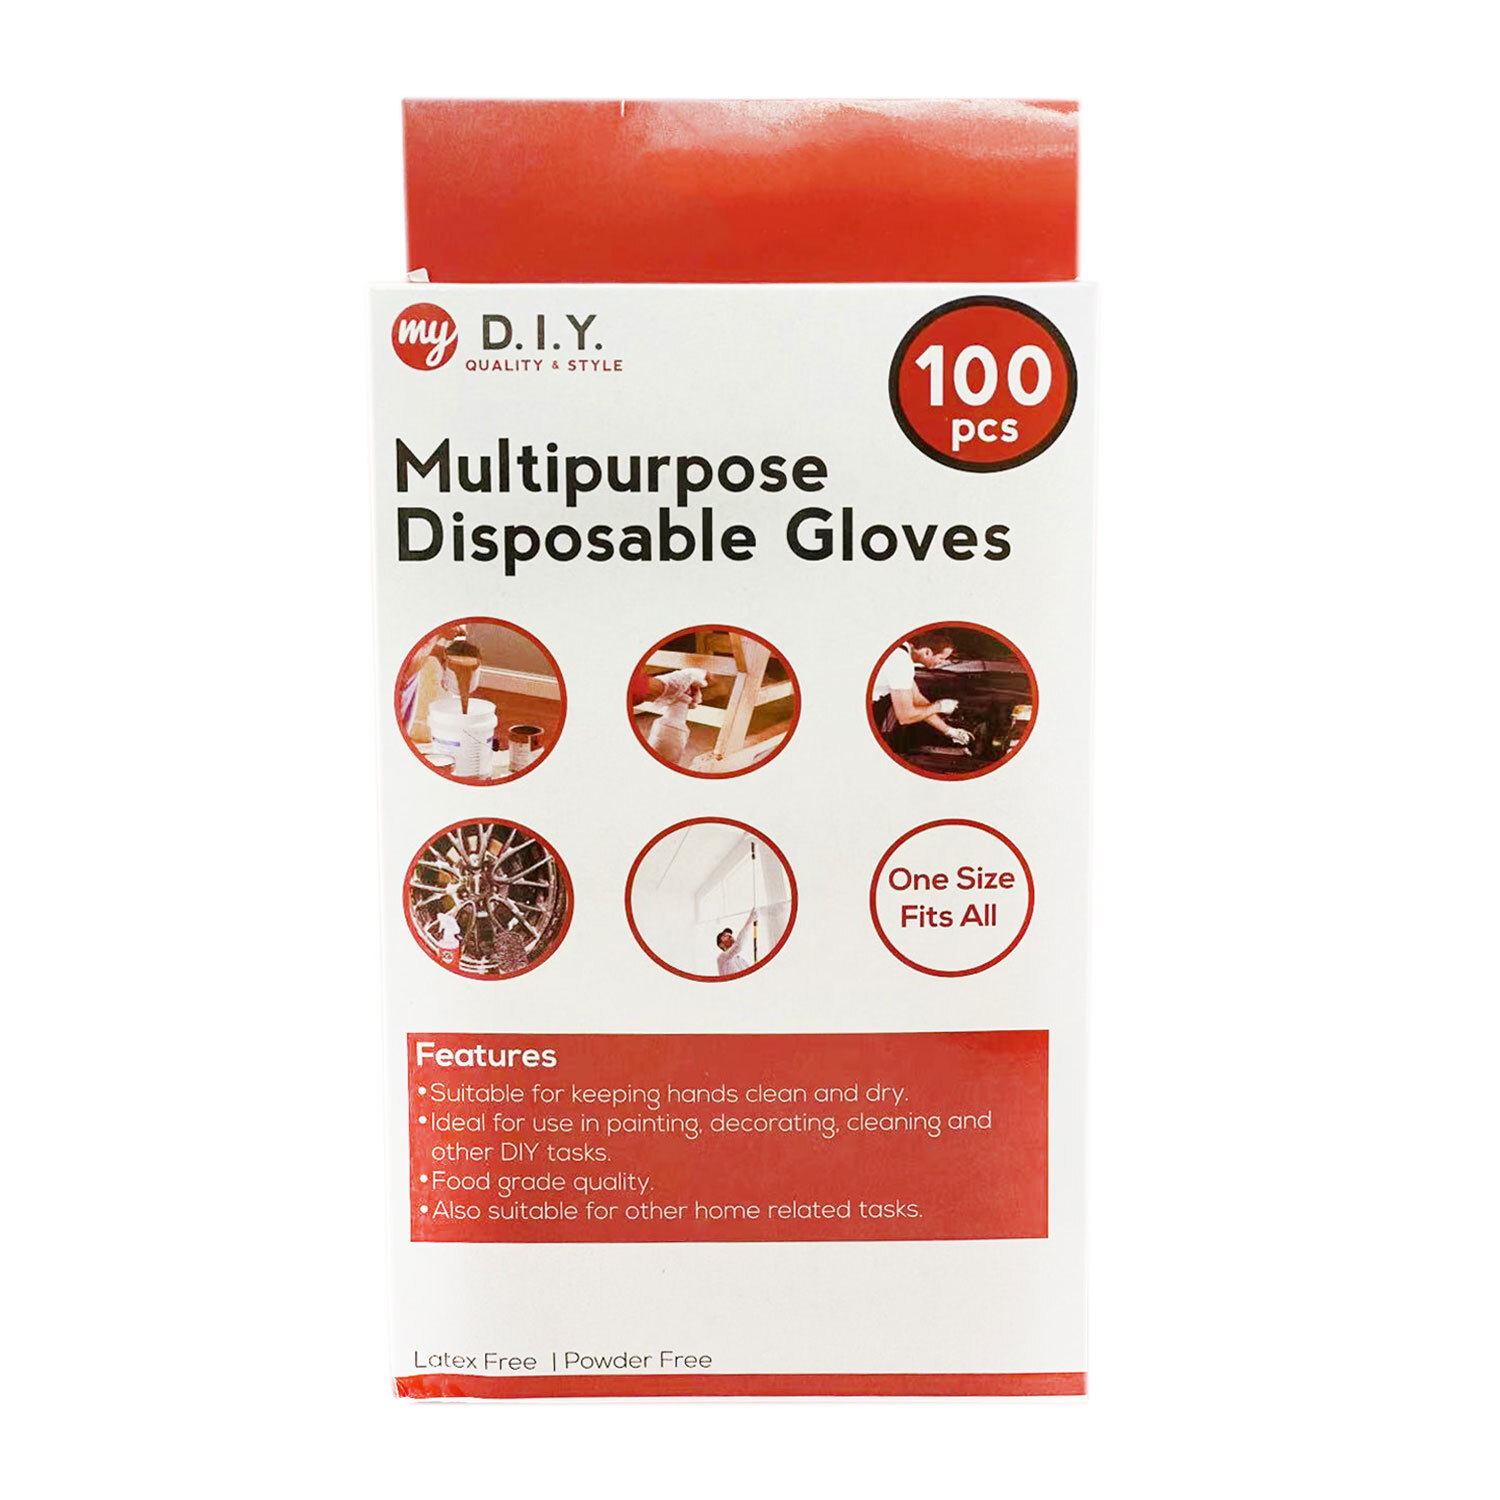 My DIY Disposable PE Gloves 100 Pack Image